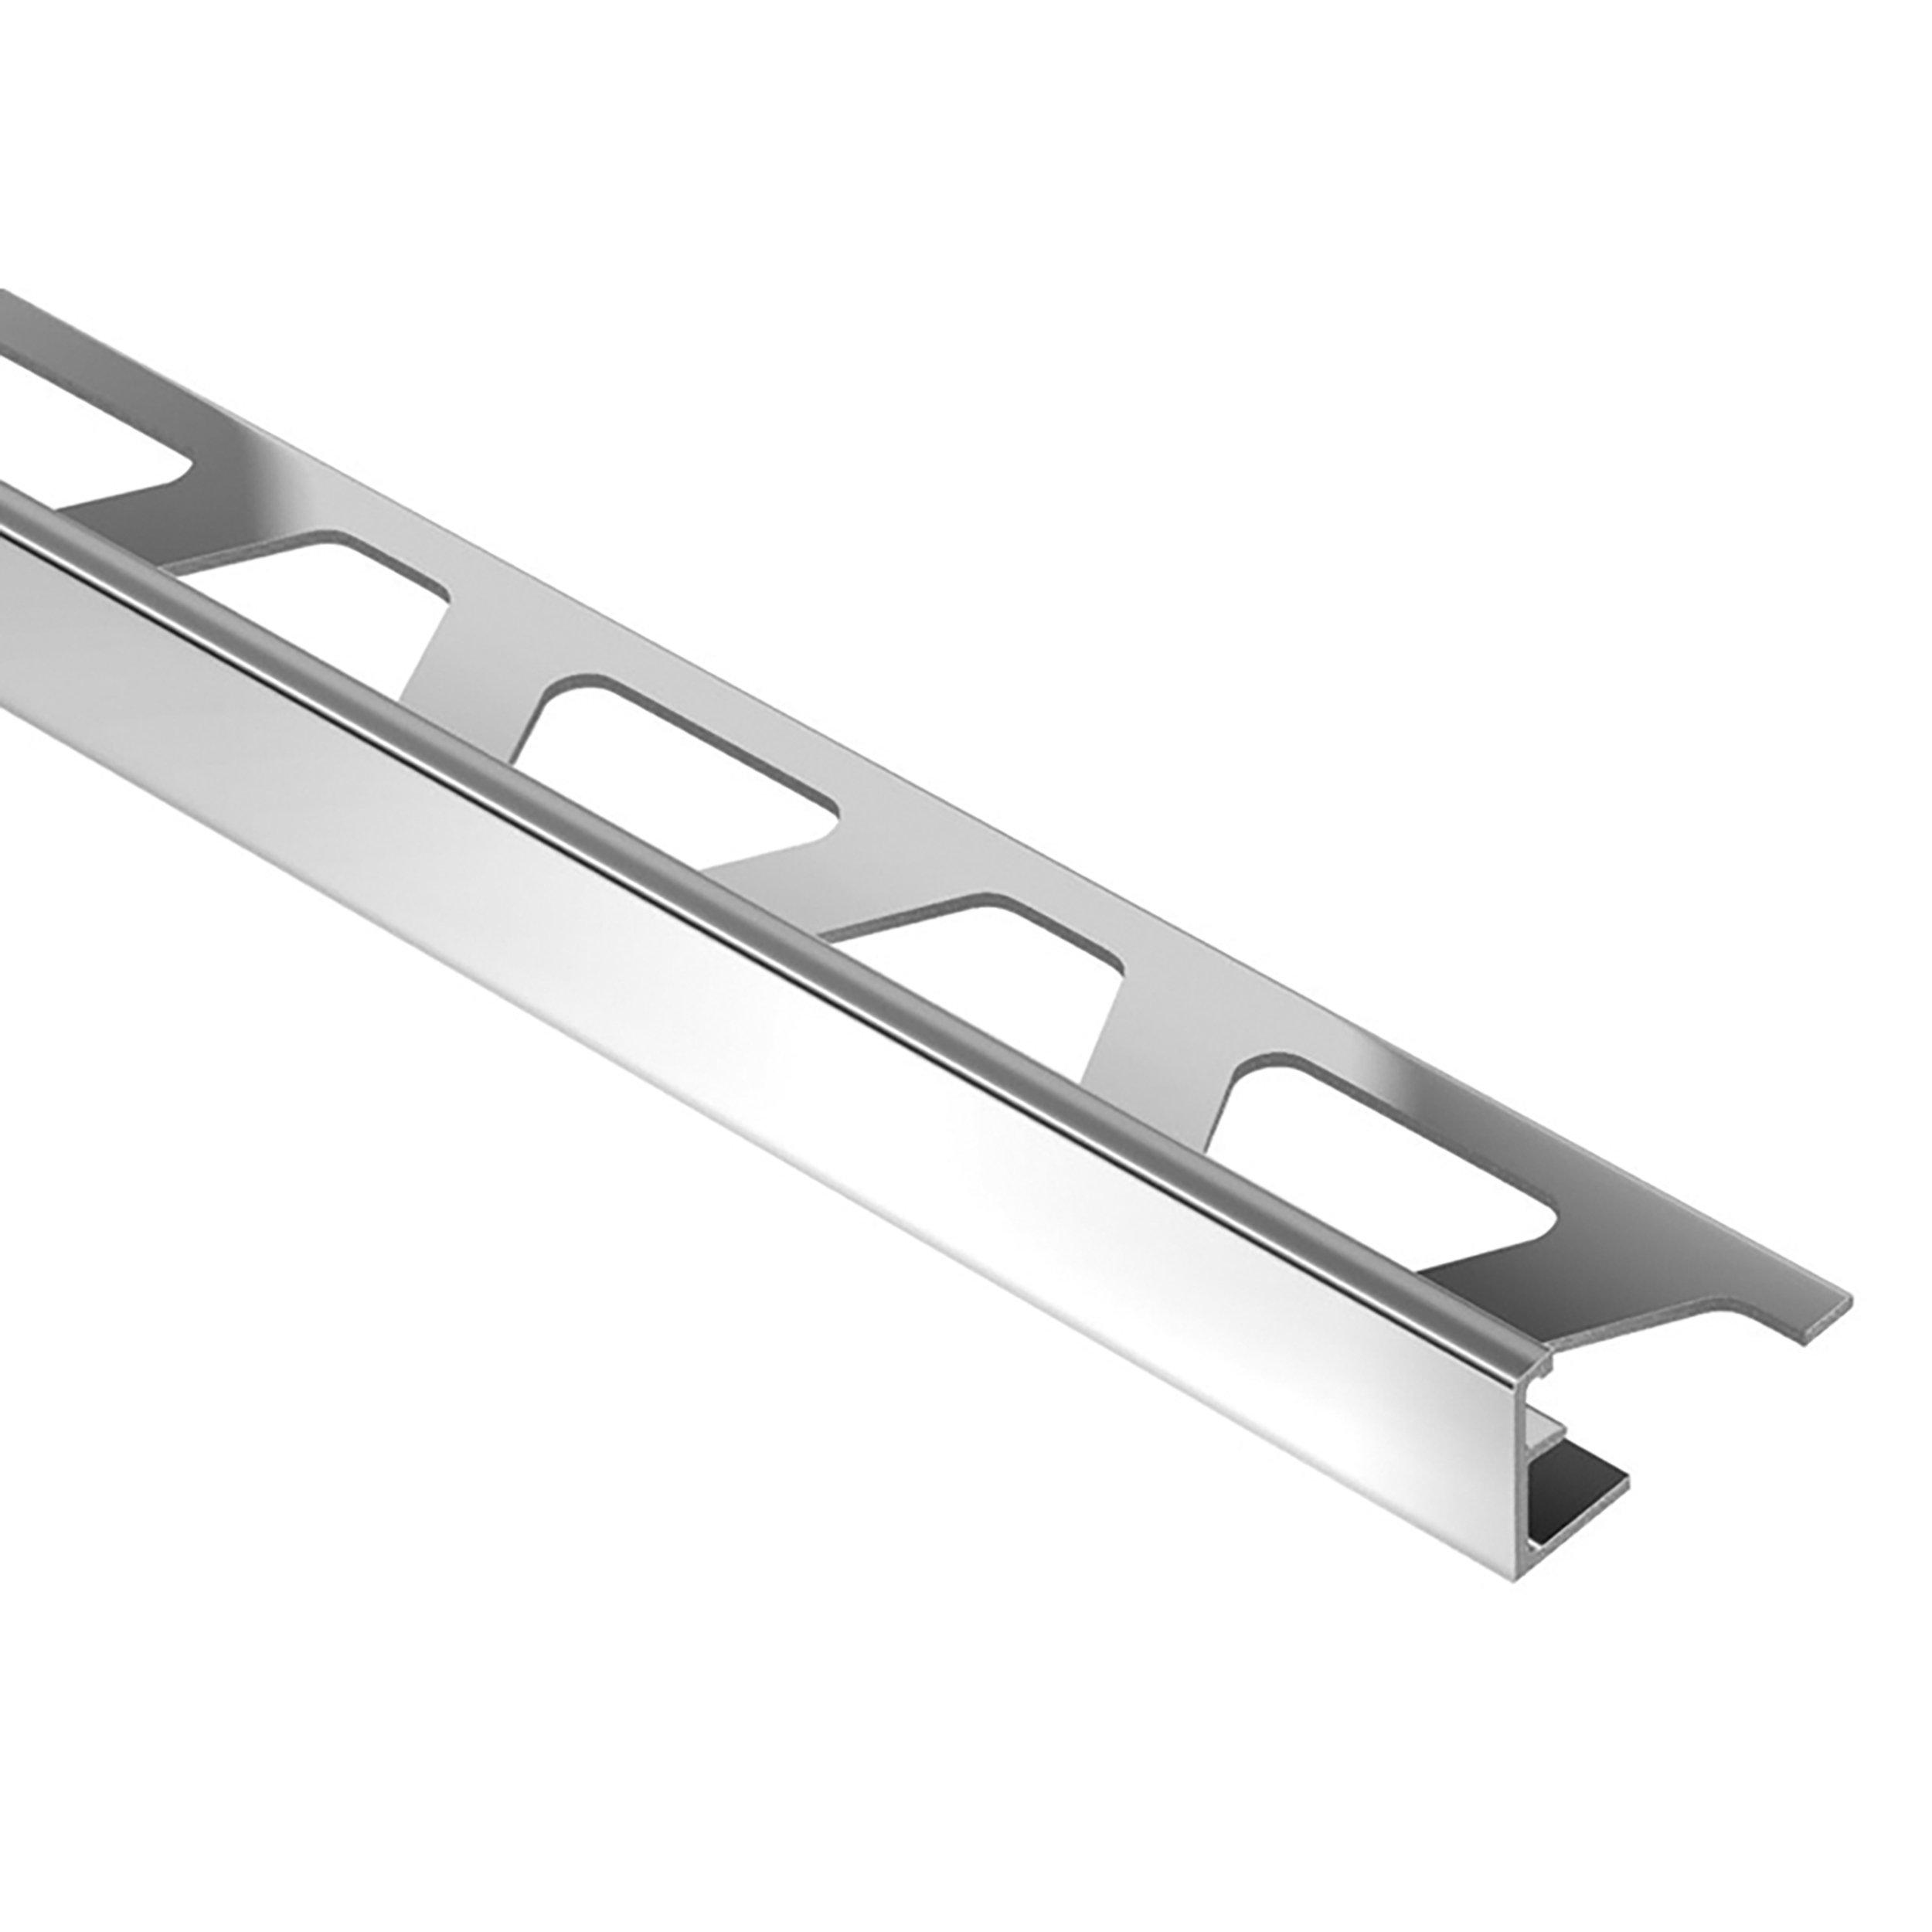 Schluter Jolly Edge Trim 5/16in. Aluminum Polished Chrome